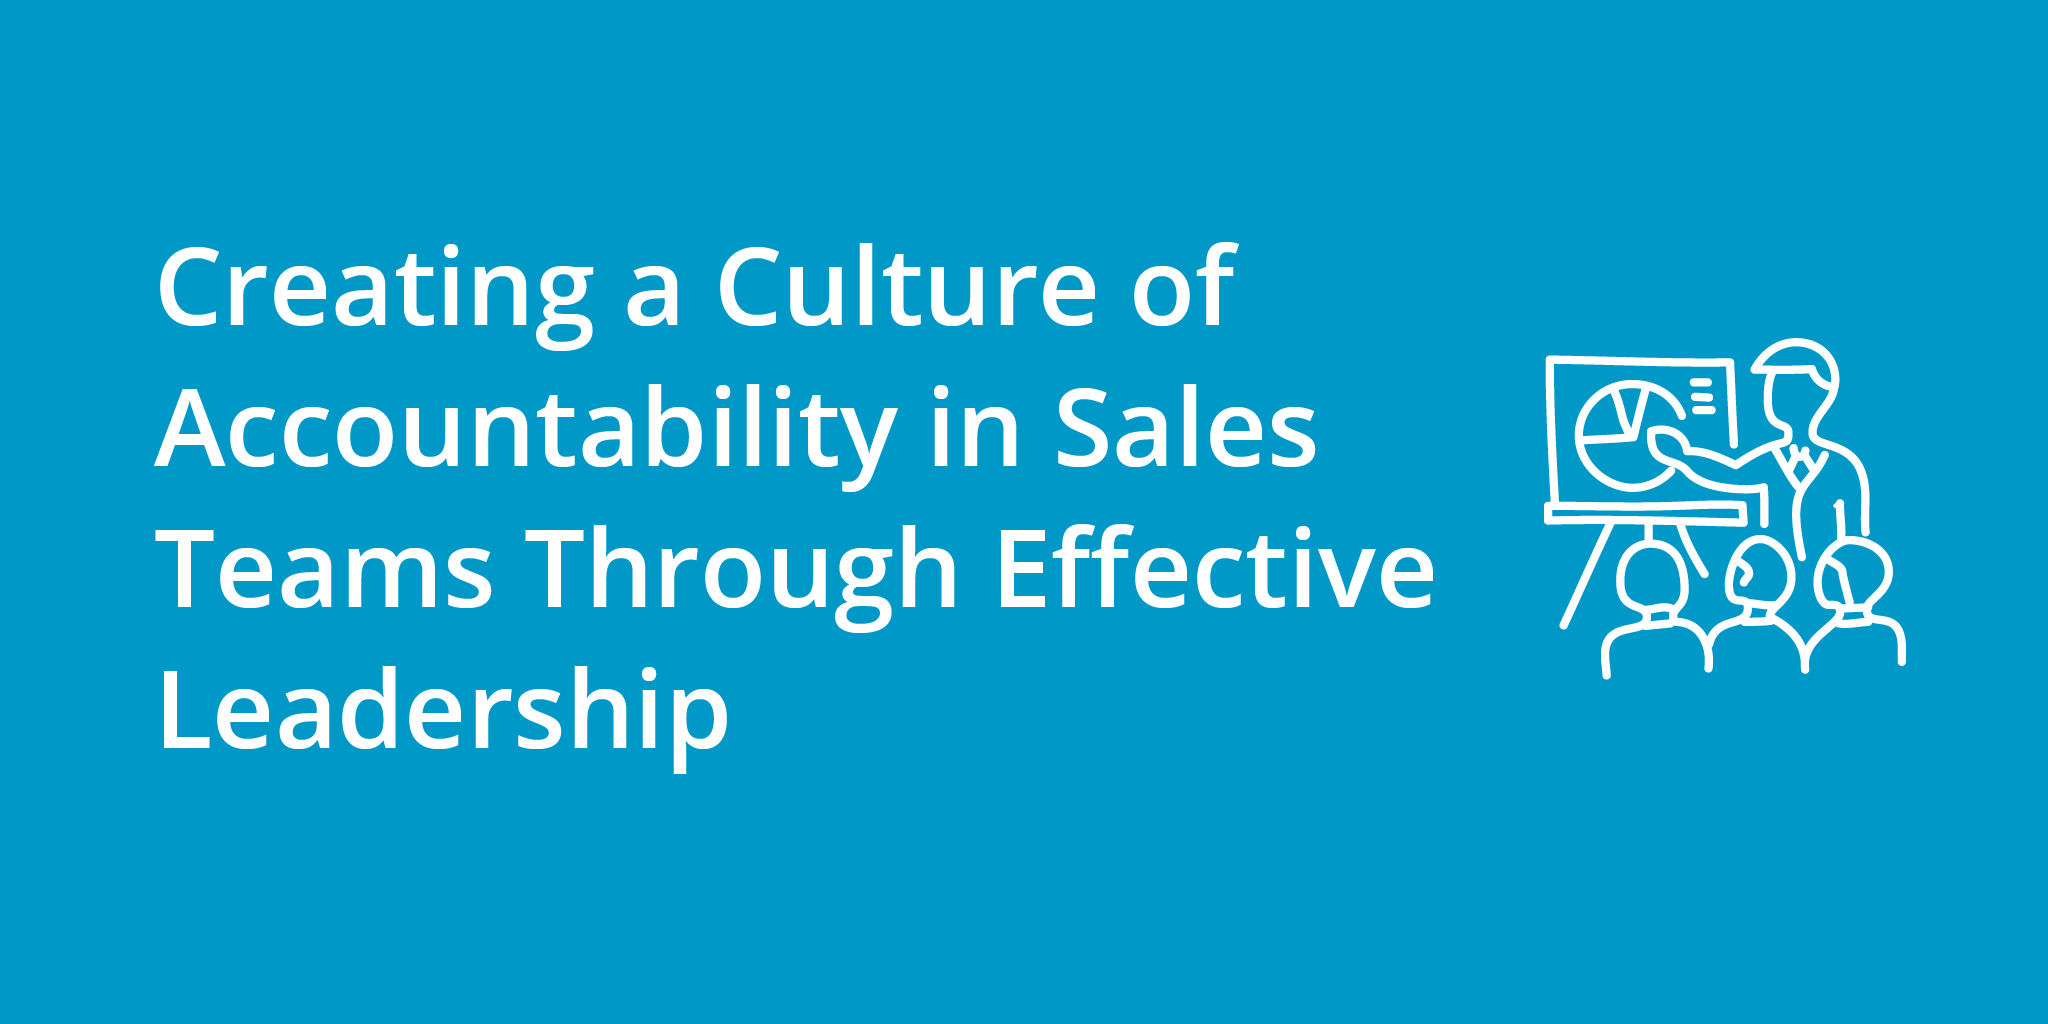 Creating a Culture of Accountability in Sales Teams Through Effective Leadership | Telephones for business